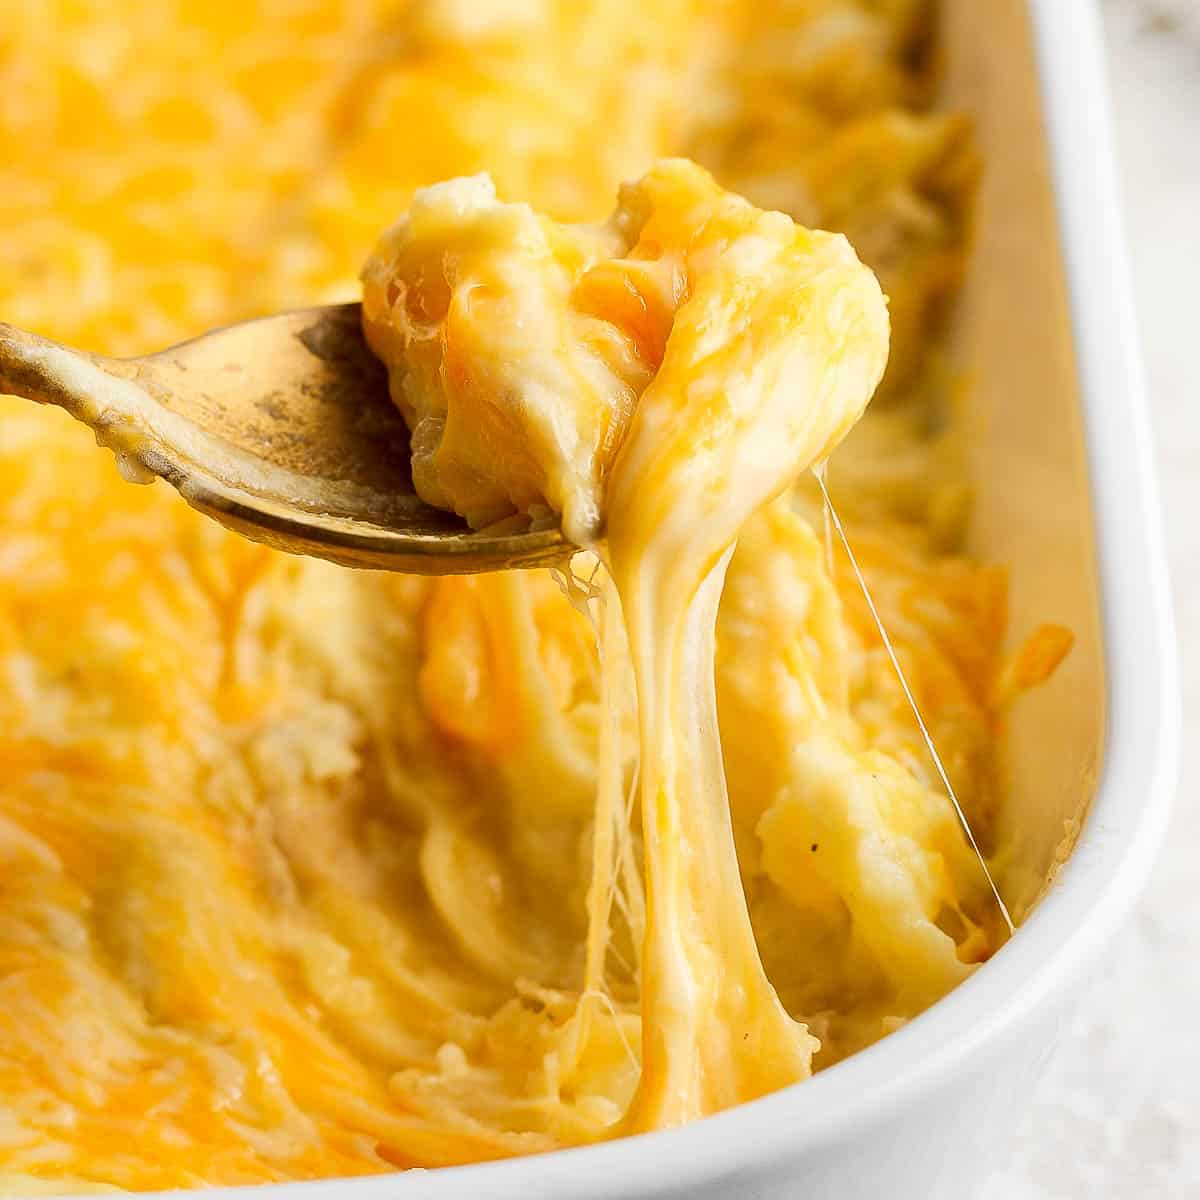 Corner shot of a pan of cheesy mashed potatoes with a spoon lifting out a scoop.